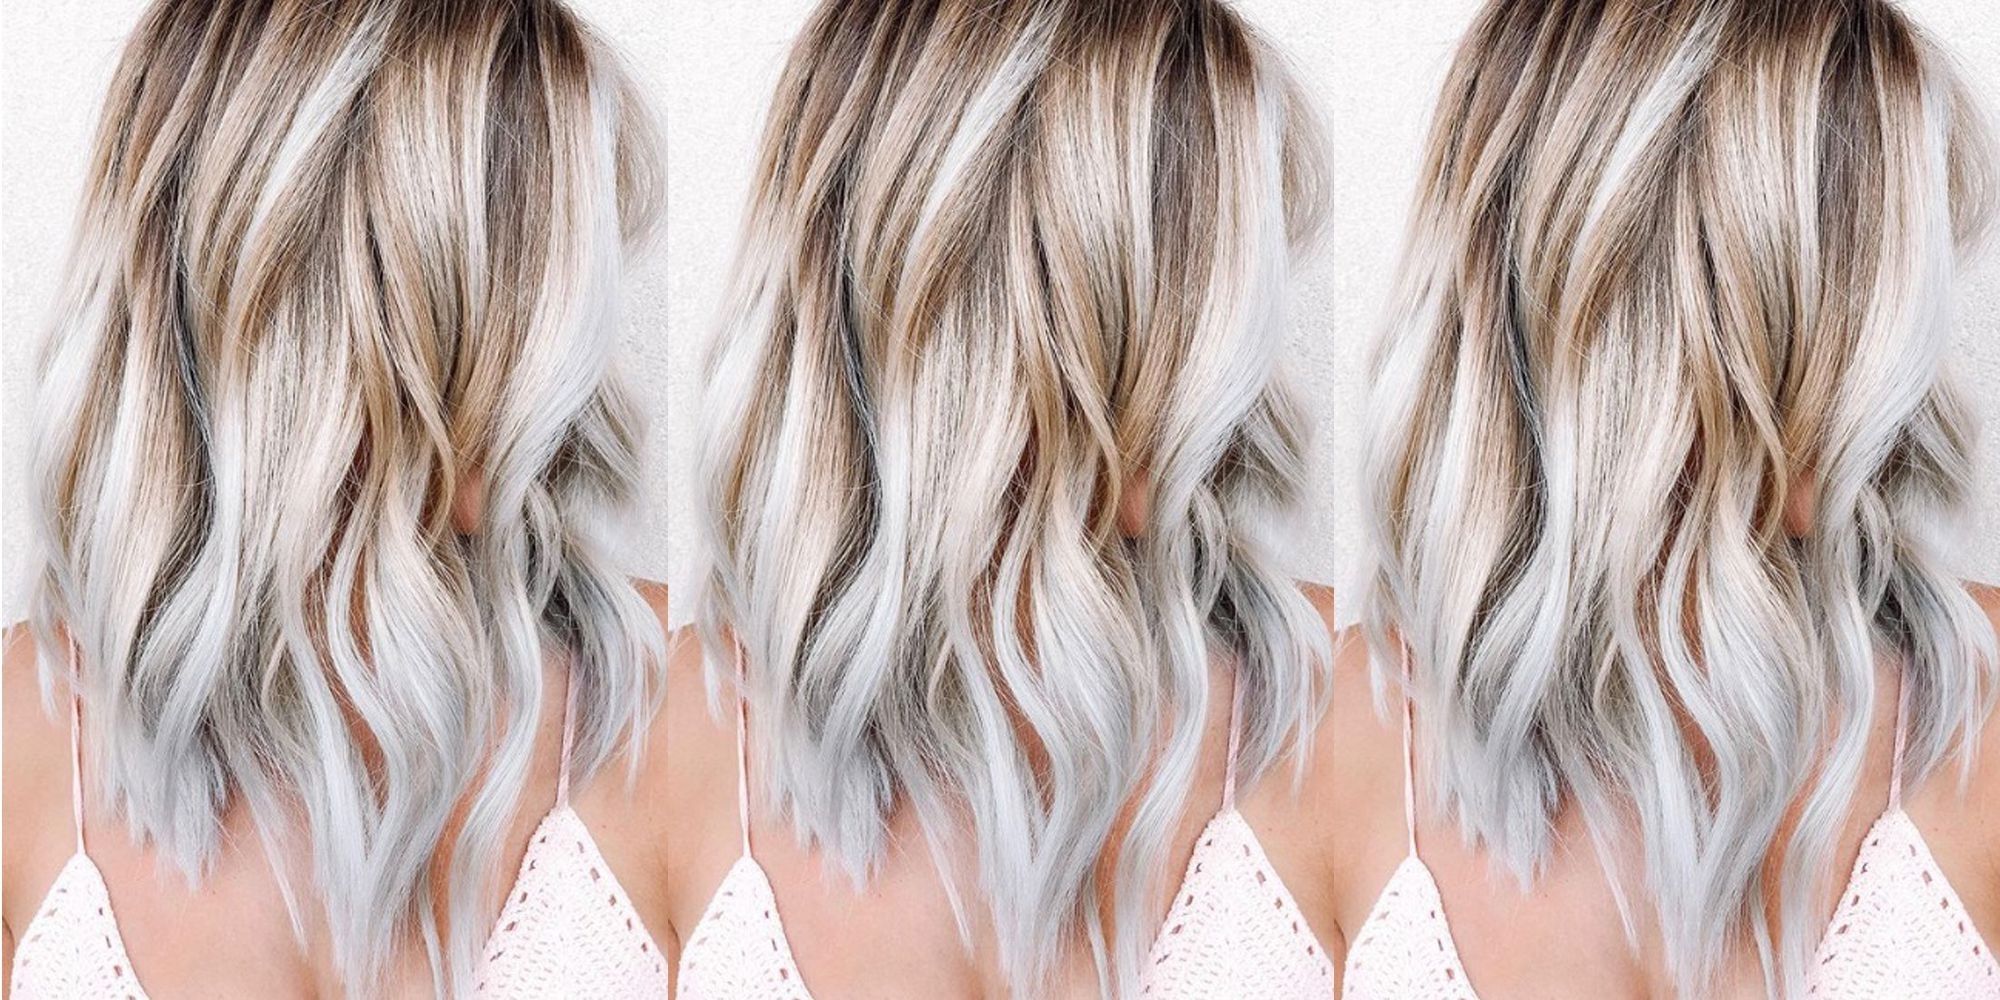 7 Blonde Hair Trends For Summer 2018 – New Ways To Try Blonde Hair With Well Liked Creamy Blonde Fade Hairstyles (View 16 of 20)